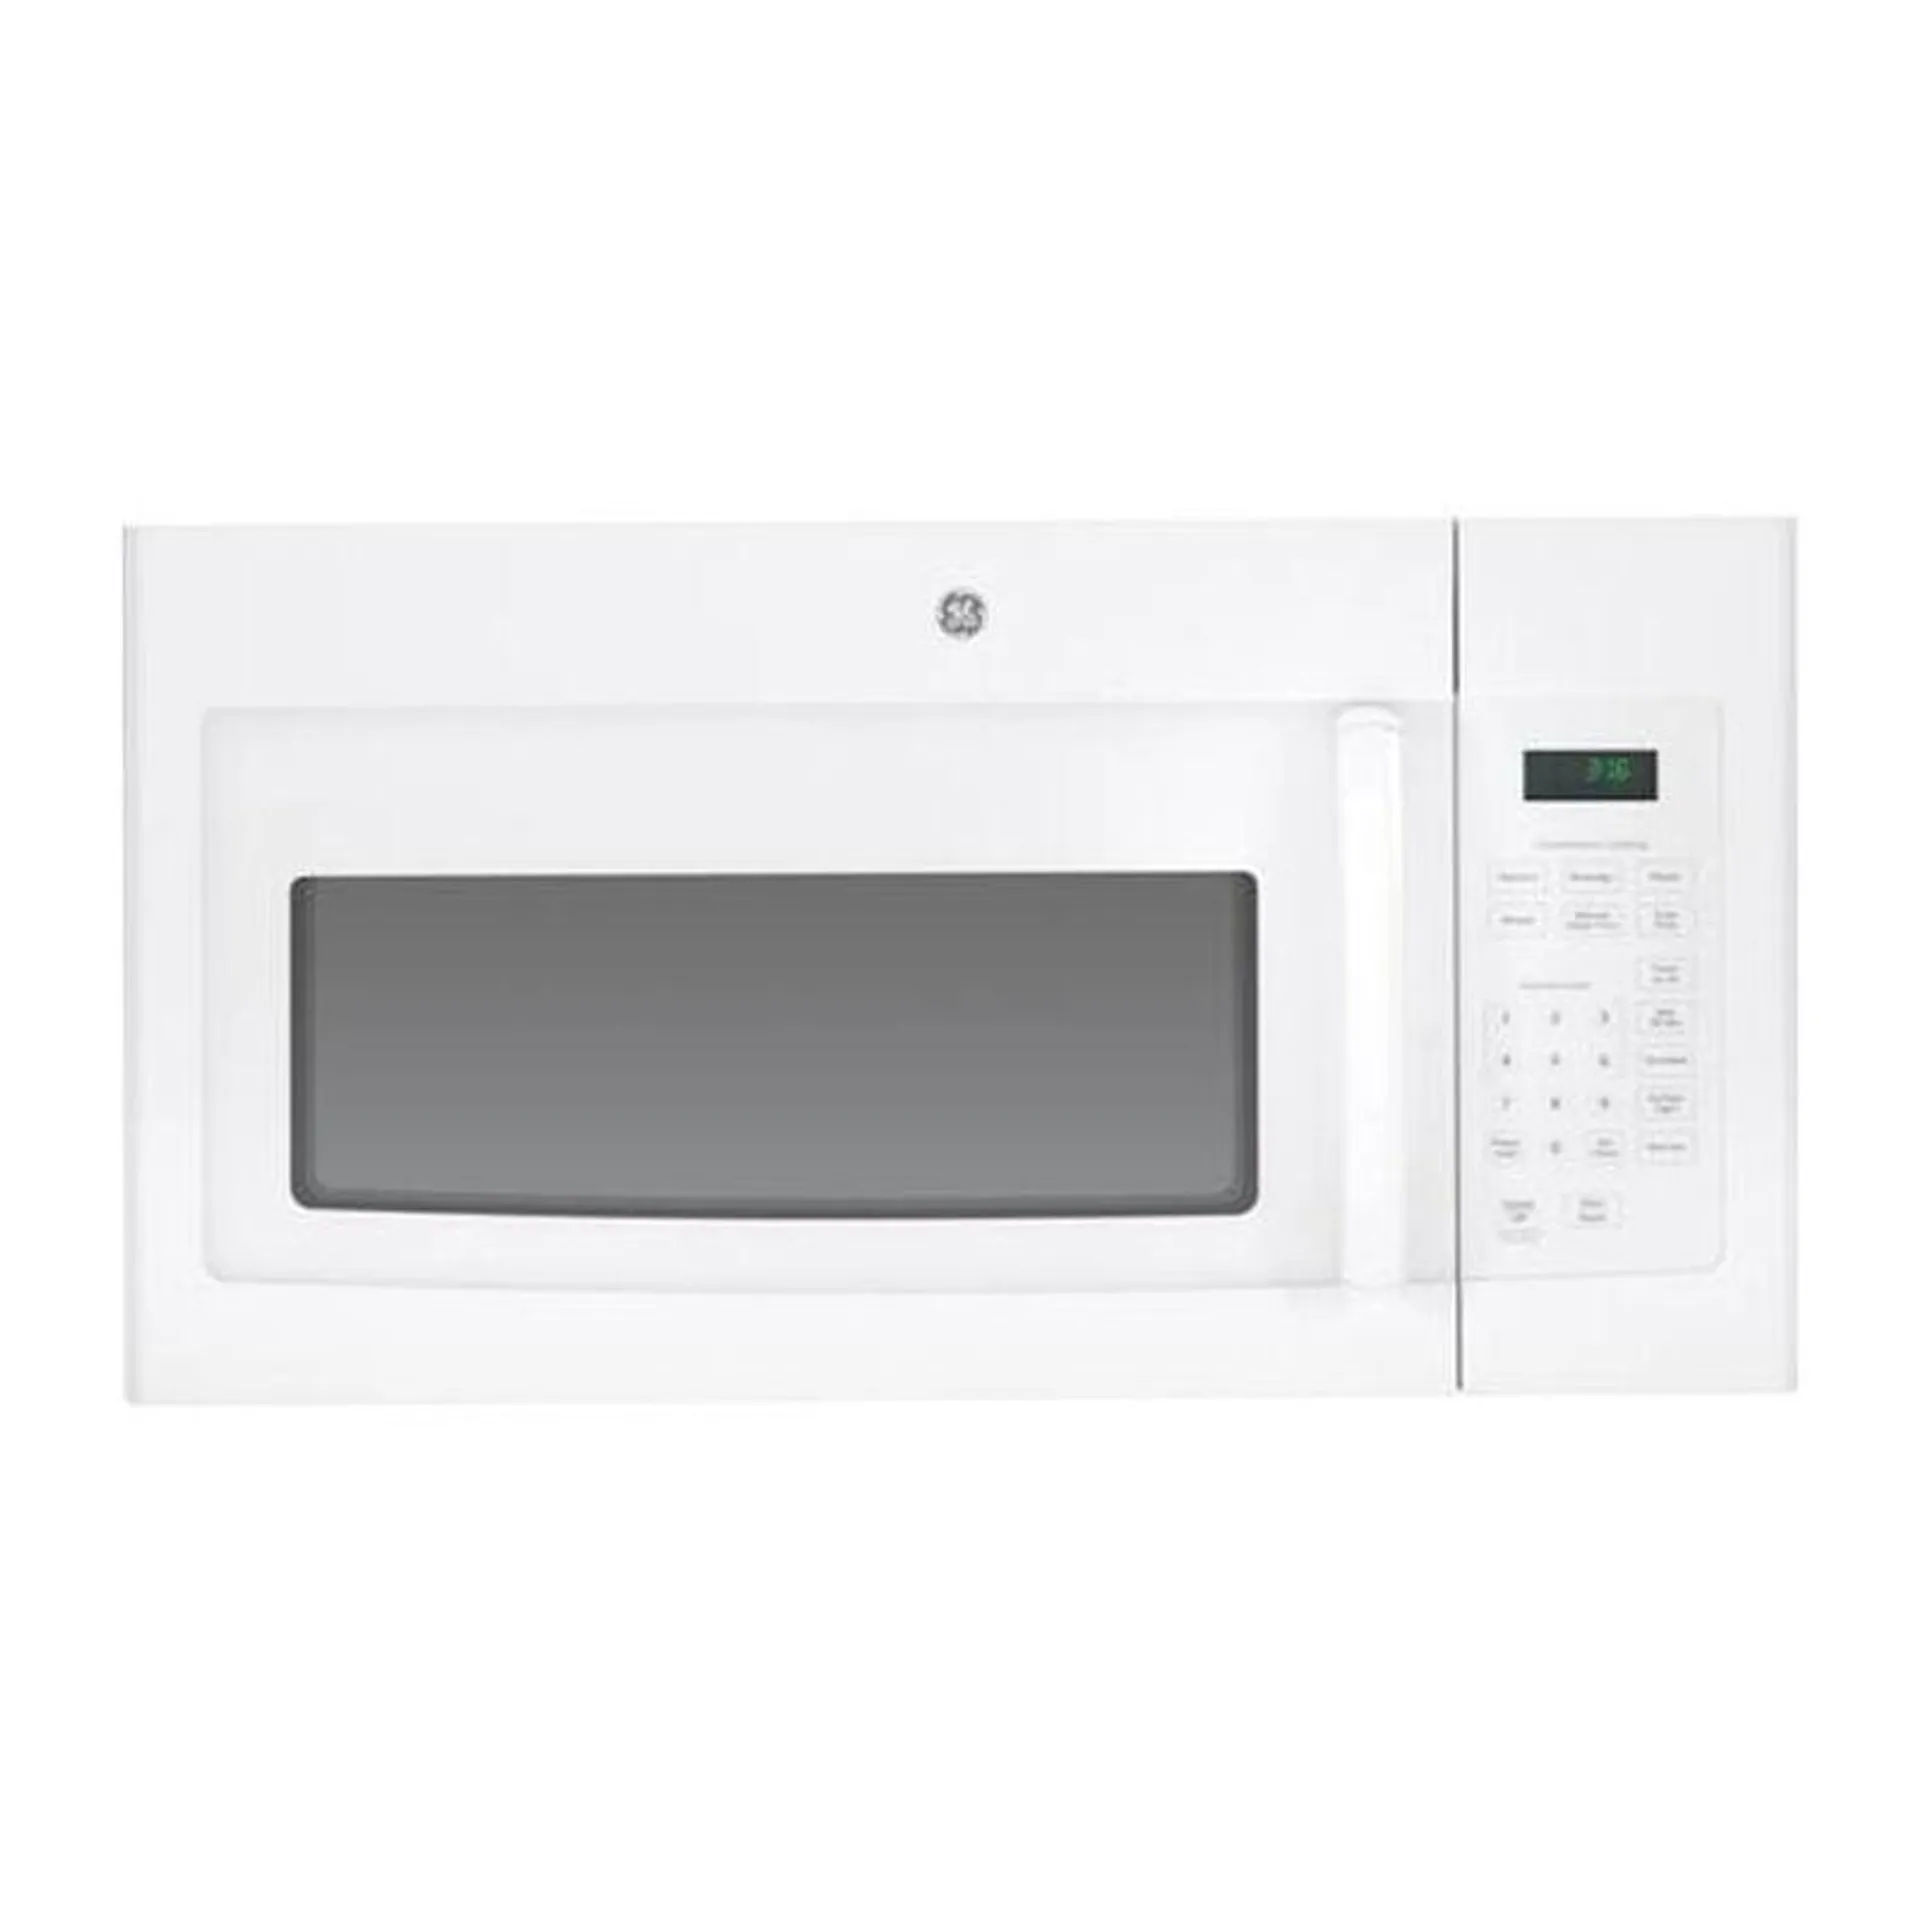 GE 30" 1.6 Cu. Ft. Over-the-Range Microwave with 10 Power Levels & 300 CFM - White